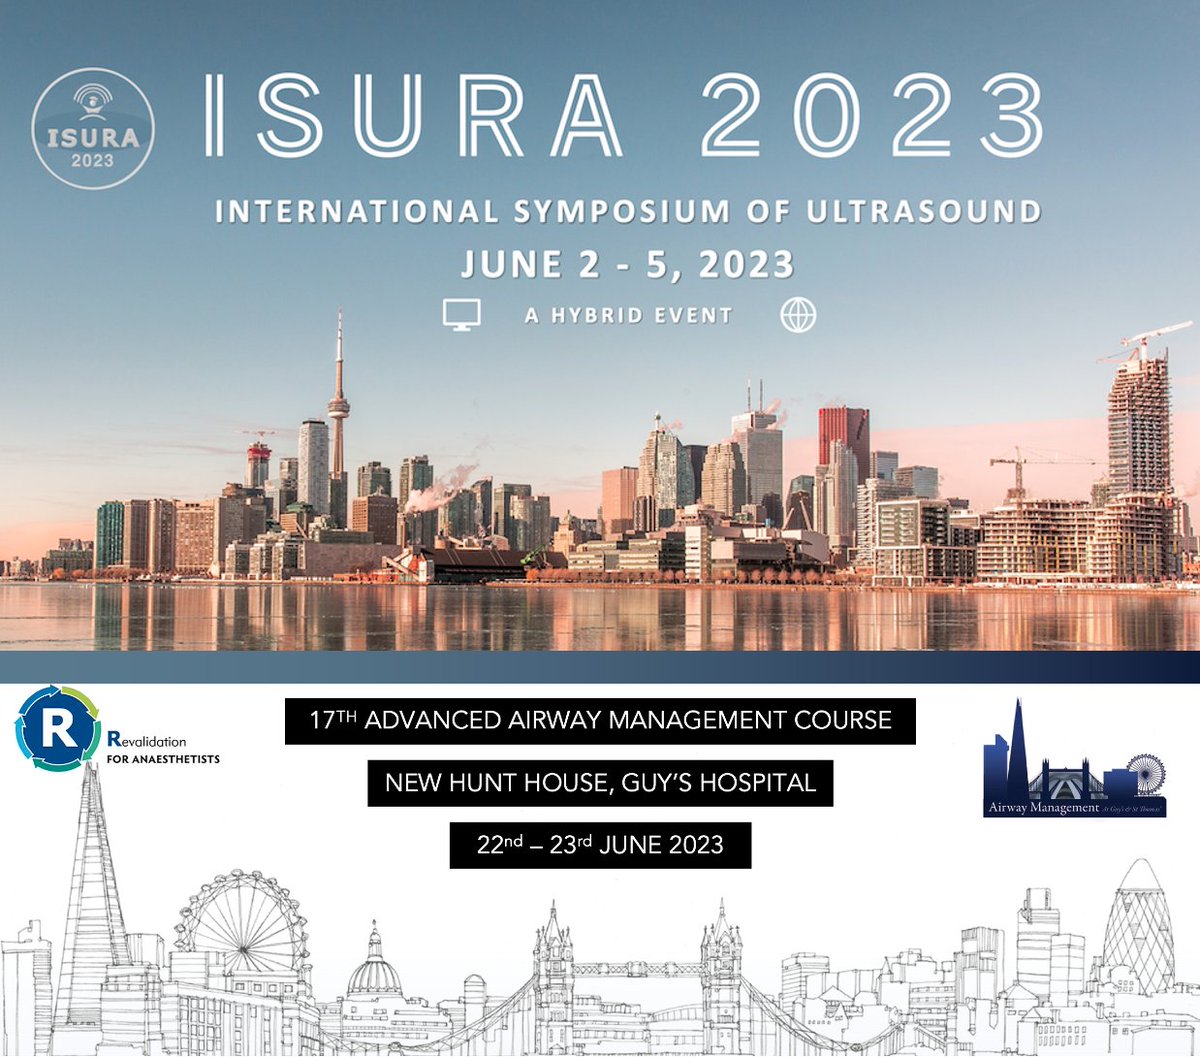 Gearing up for 2 of the most exciting events of the year: 1. ISURA 2023—an elite regional anaesthesia meeting with the highest quality education: tinyurl.com/5cvcs2xc 2. GAMC 2023—the most dynamic airway course I've been to (Apply for grants too!): tinyurl.com/2p9a445u